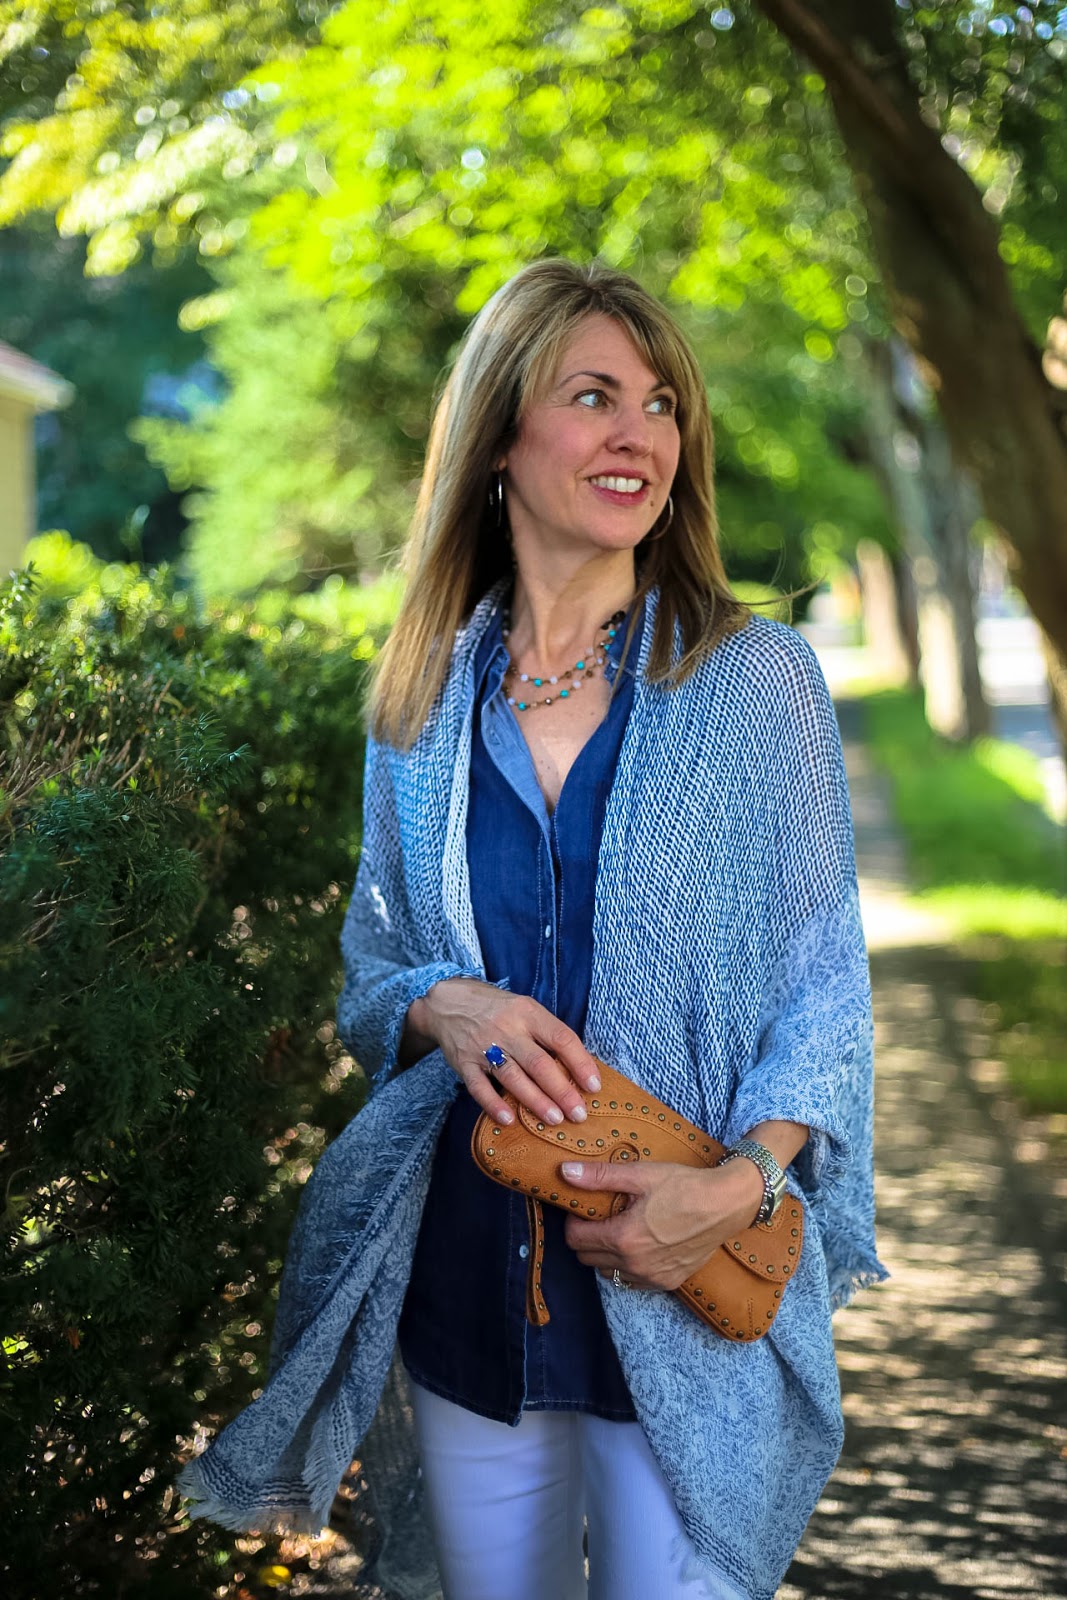 The Midlife Fashionista: Summer to fall outfit